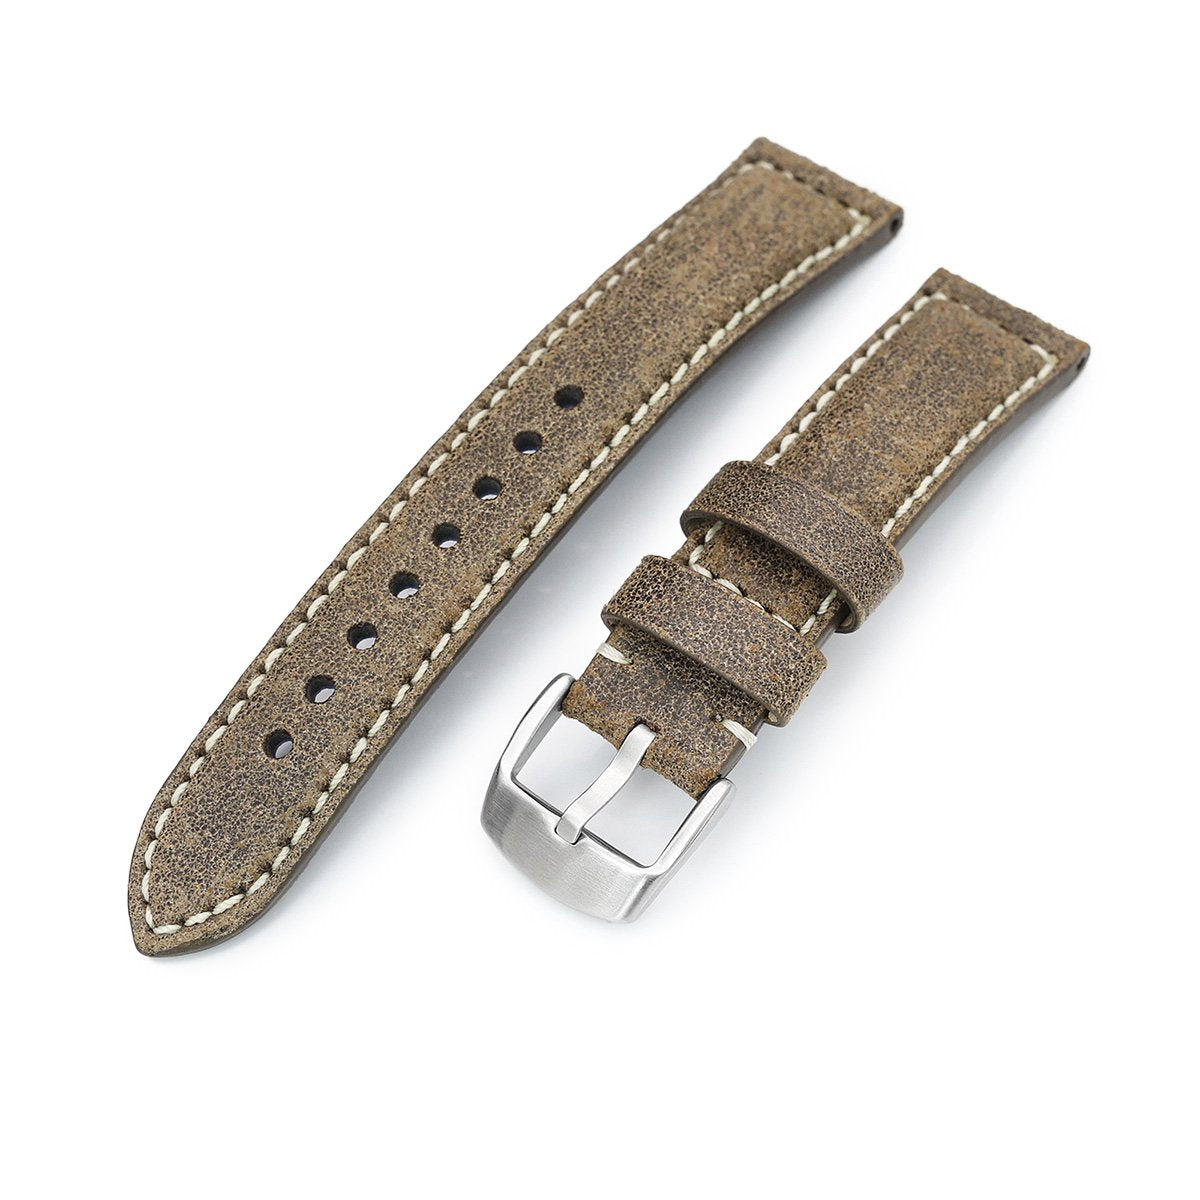 MiLTAT 20mm Genuine Olive Brown Distressed Leather Watch Strap Extra Soft Beige Stitching Strapcode Watch Bands